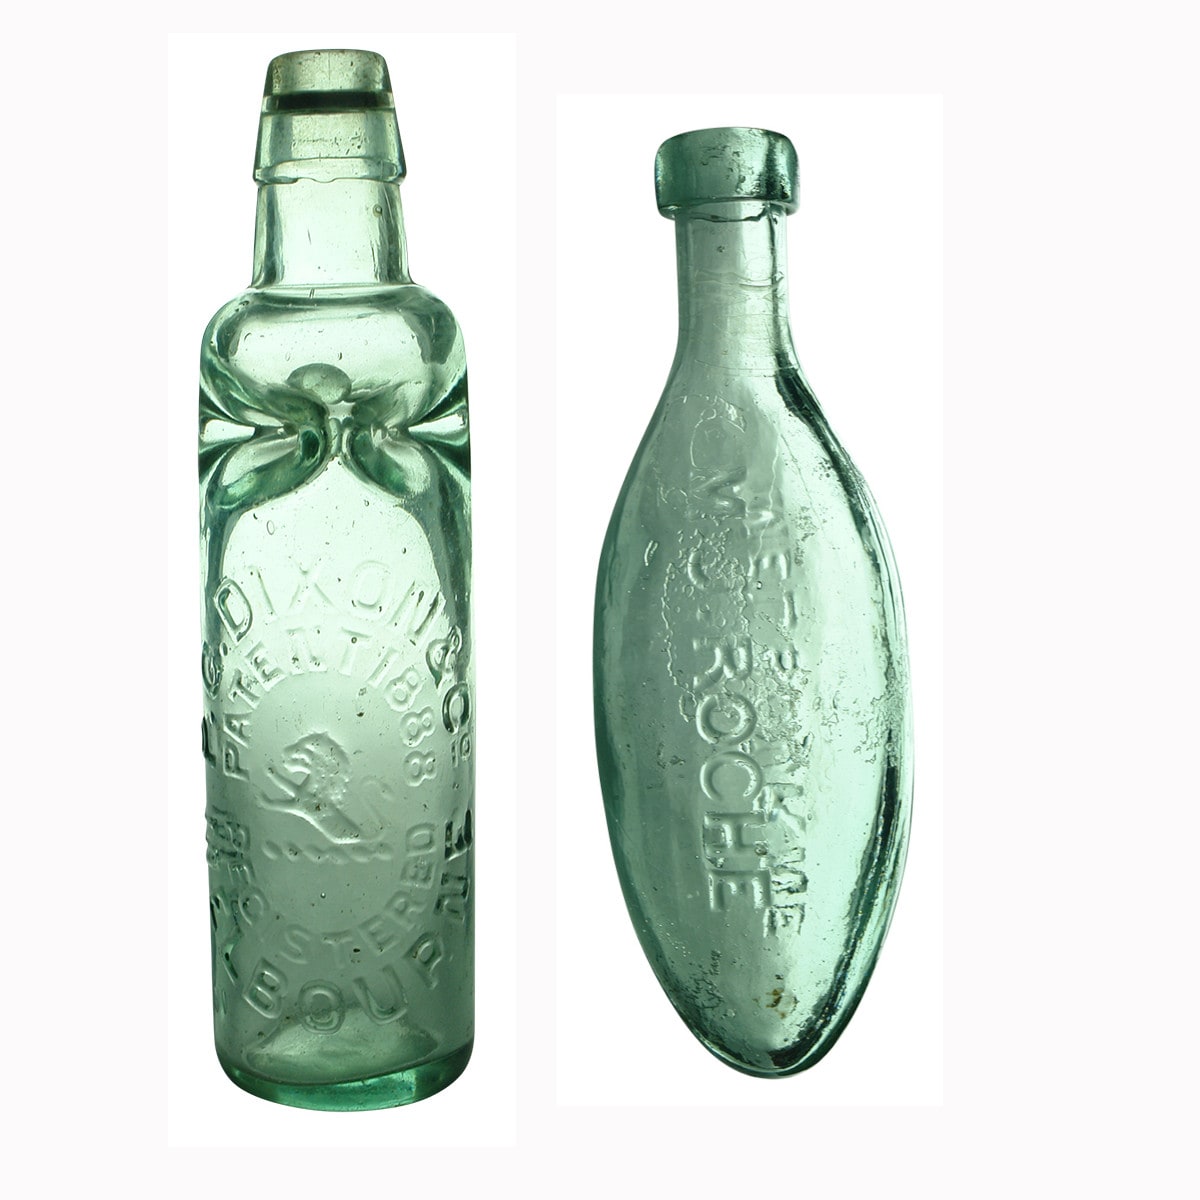 Pair of Melbourne Aerated Waters: Dixon Patent and Roche Torpedo.